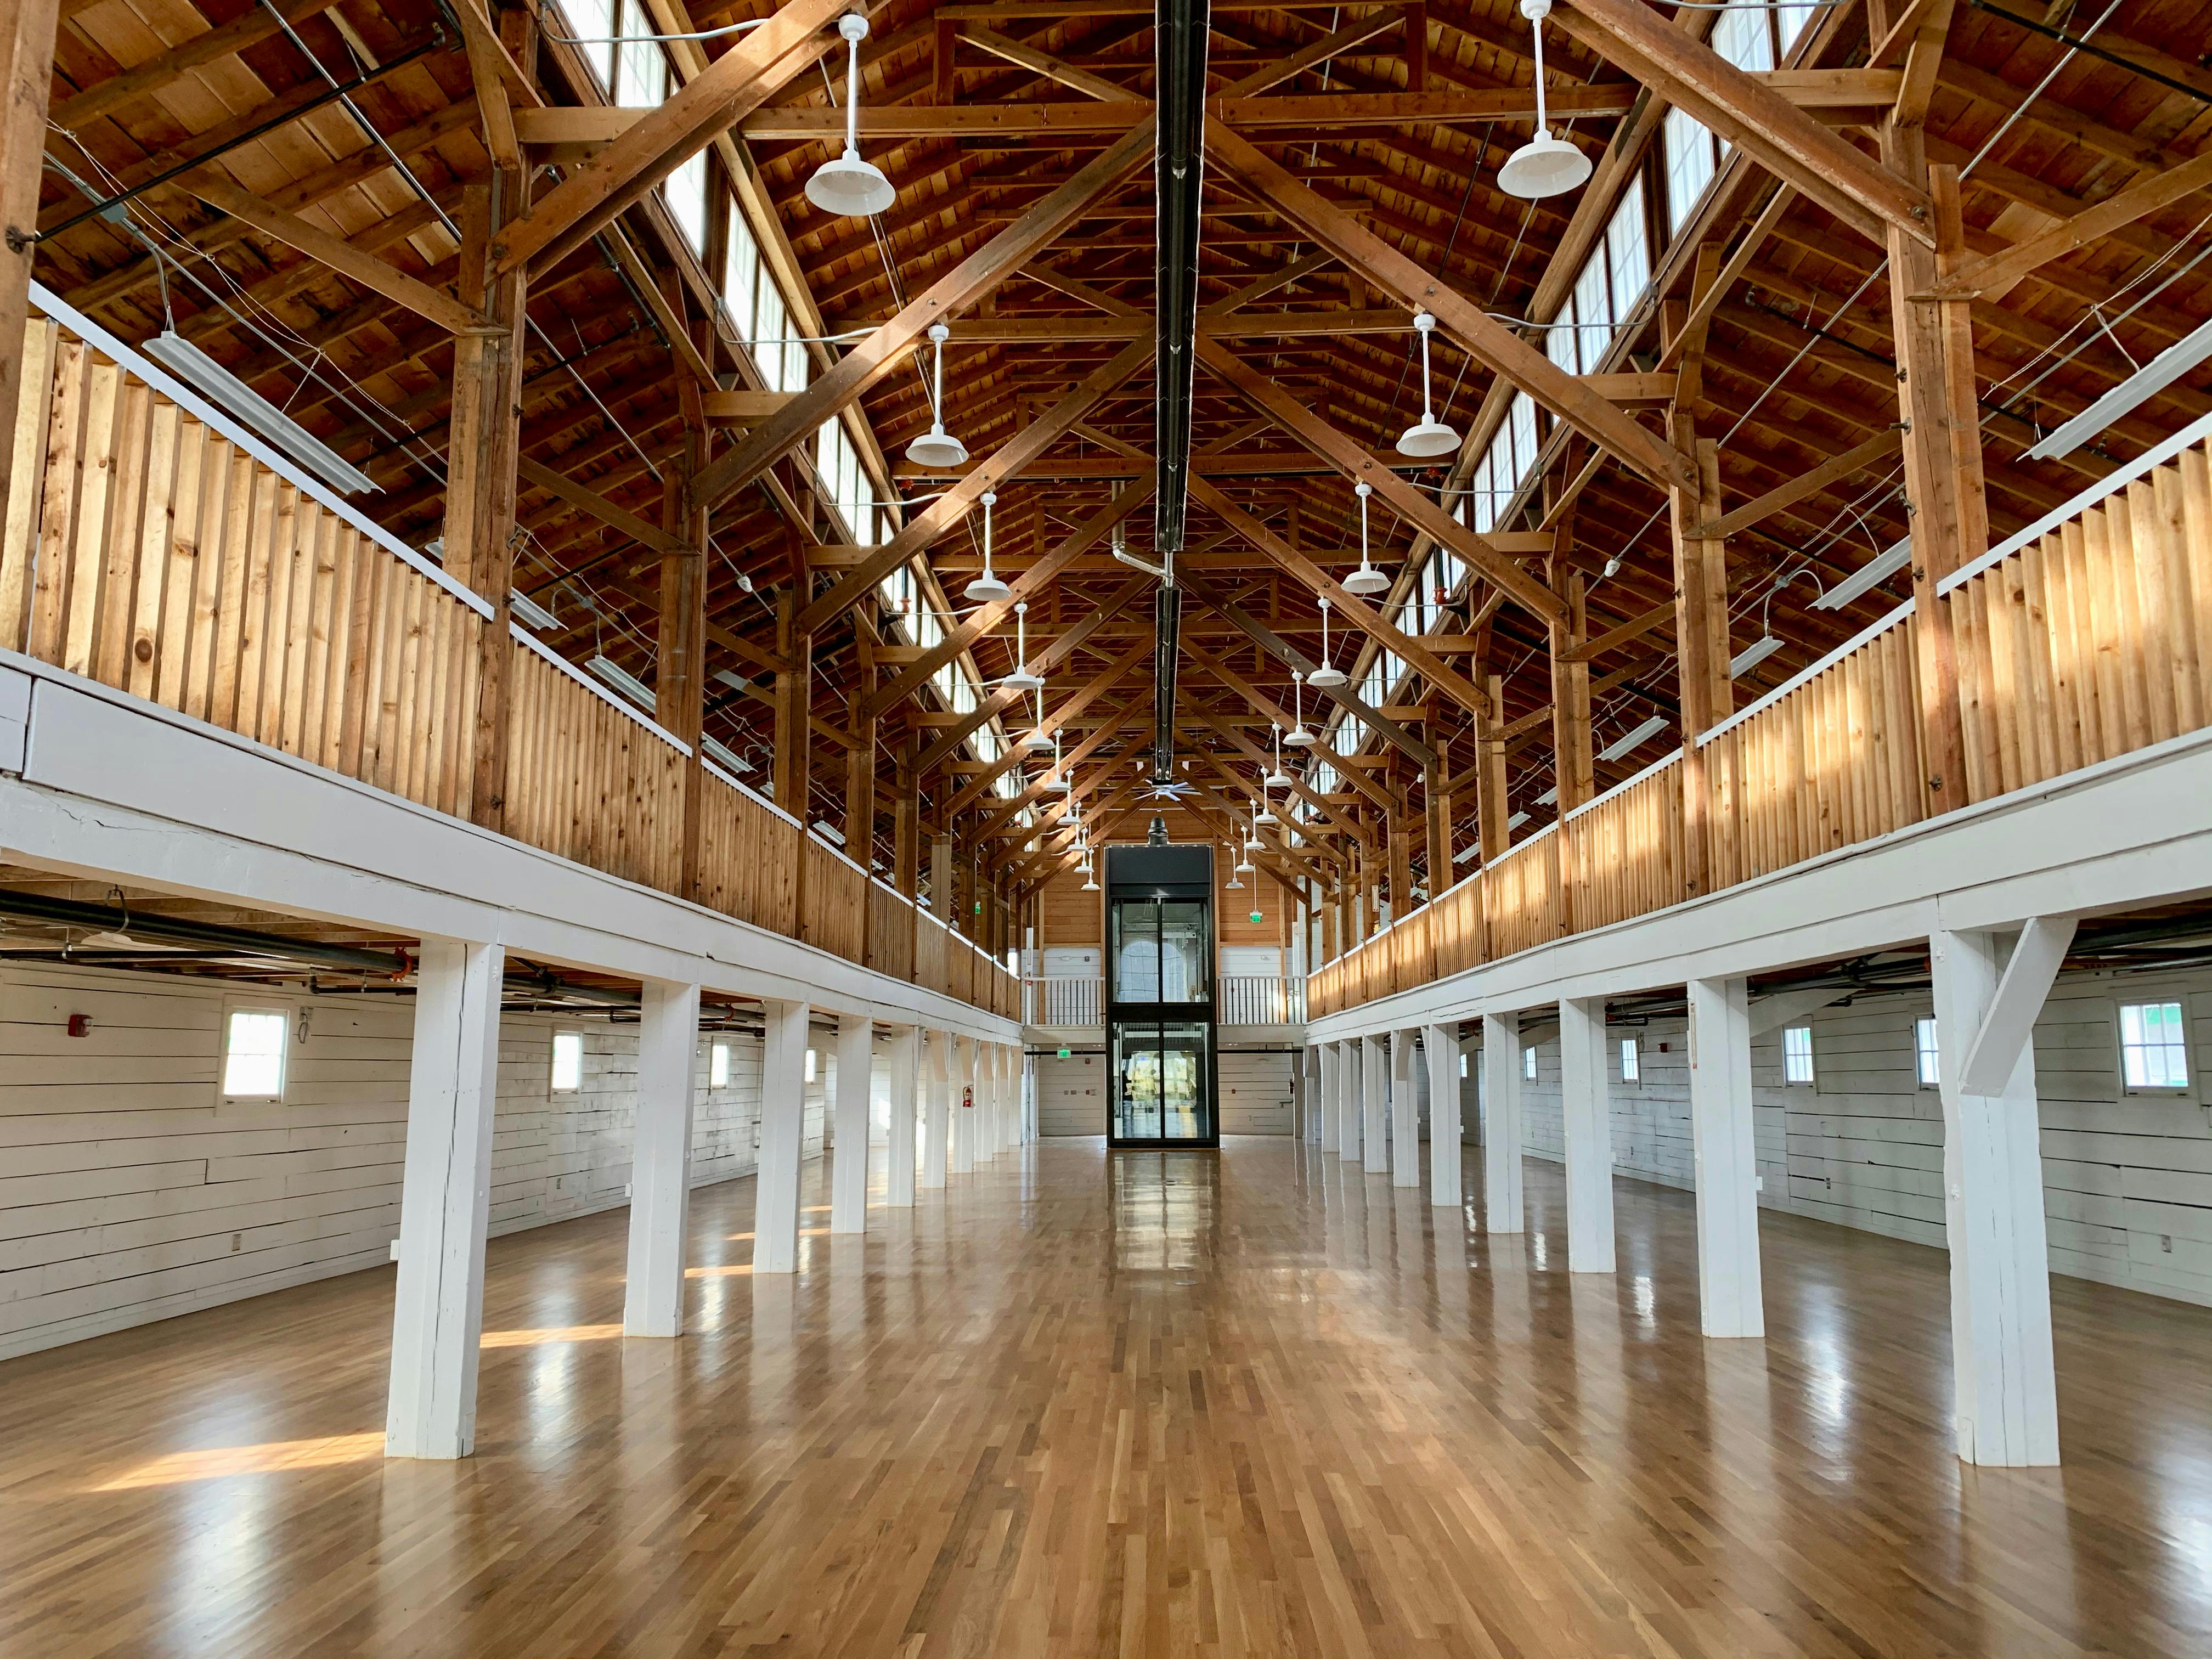 Inside of Fairgrounds Commercial Building showing polished wood floors and light streaming through the windows.